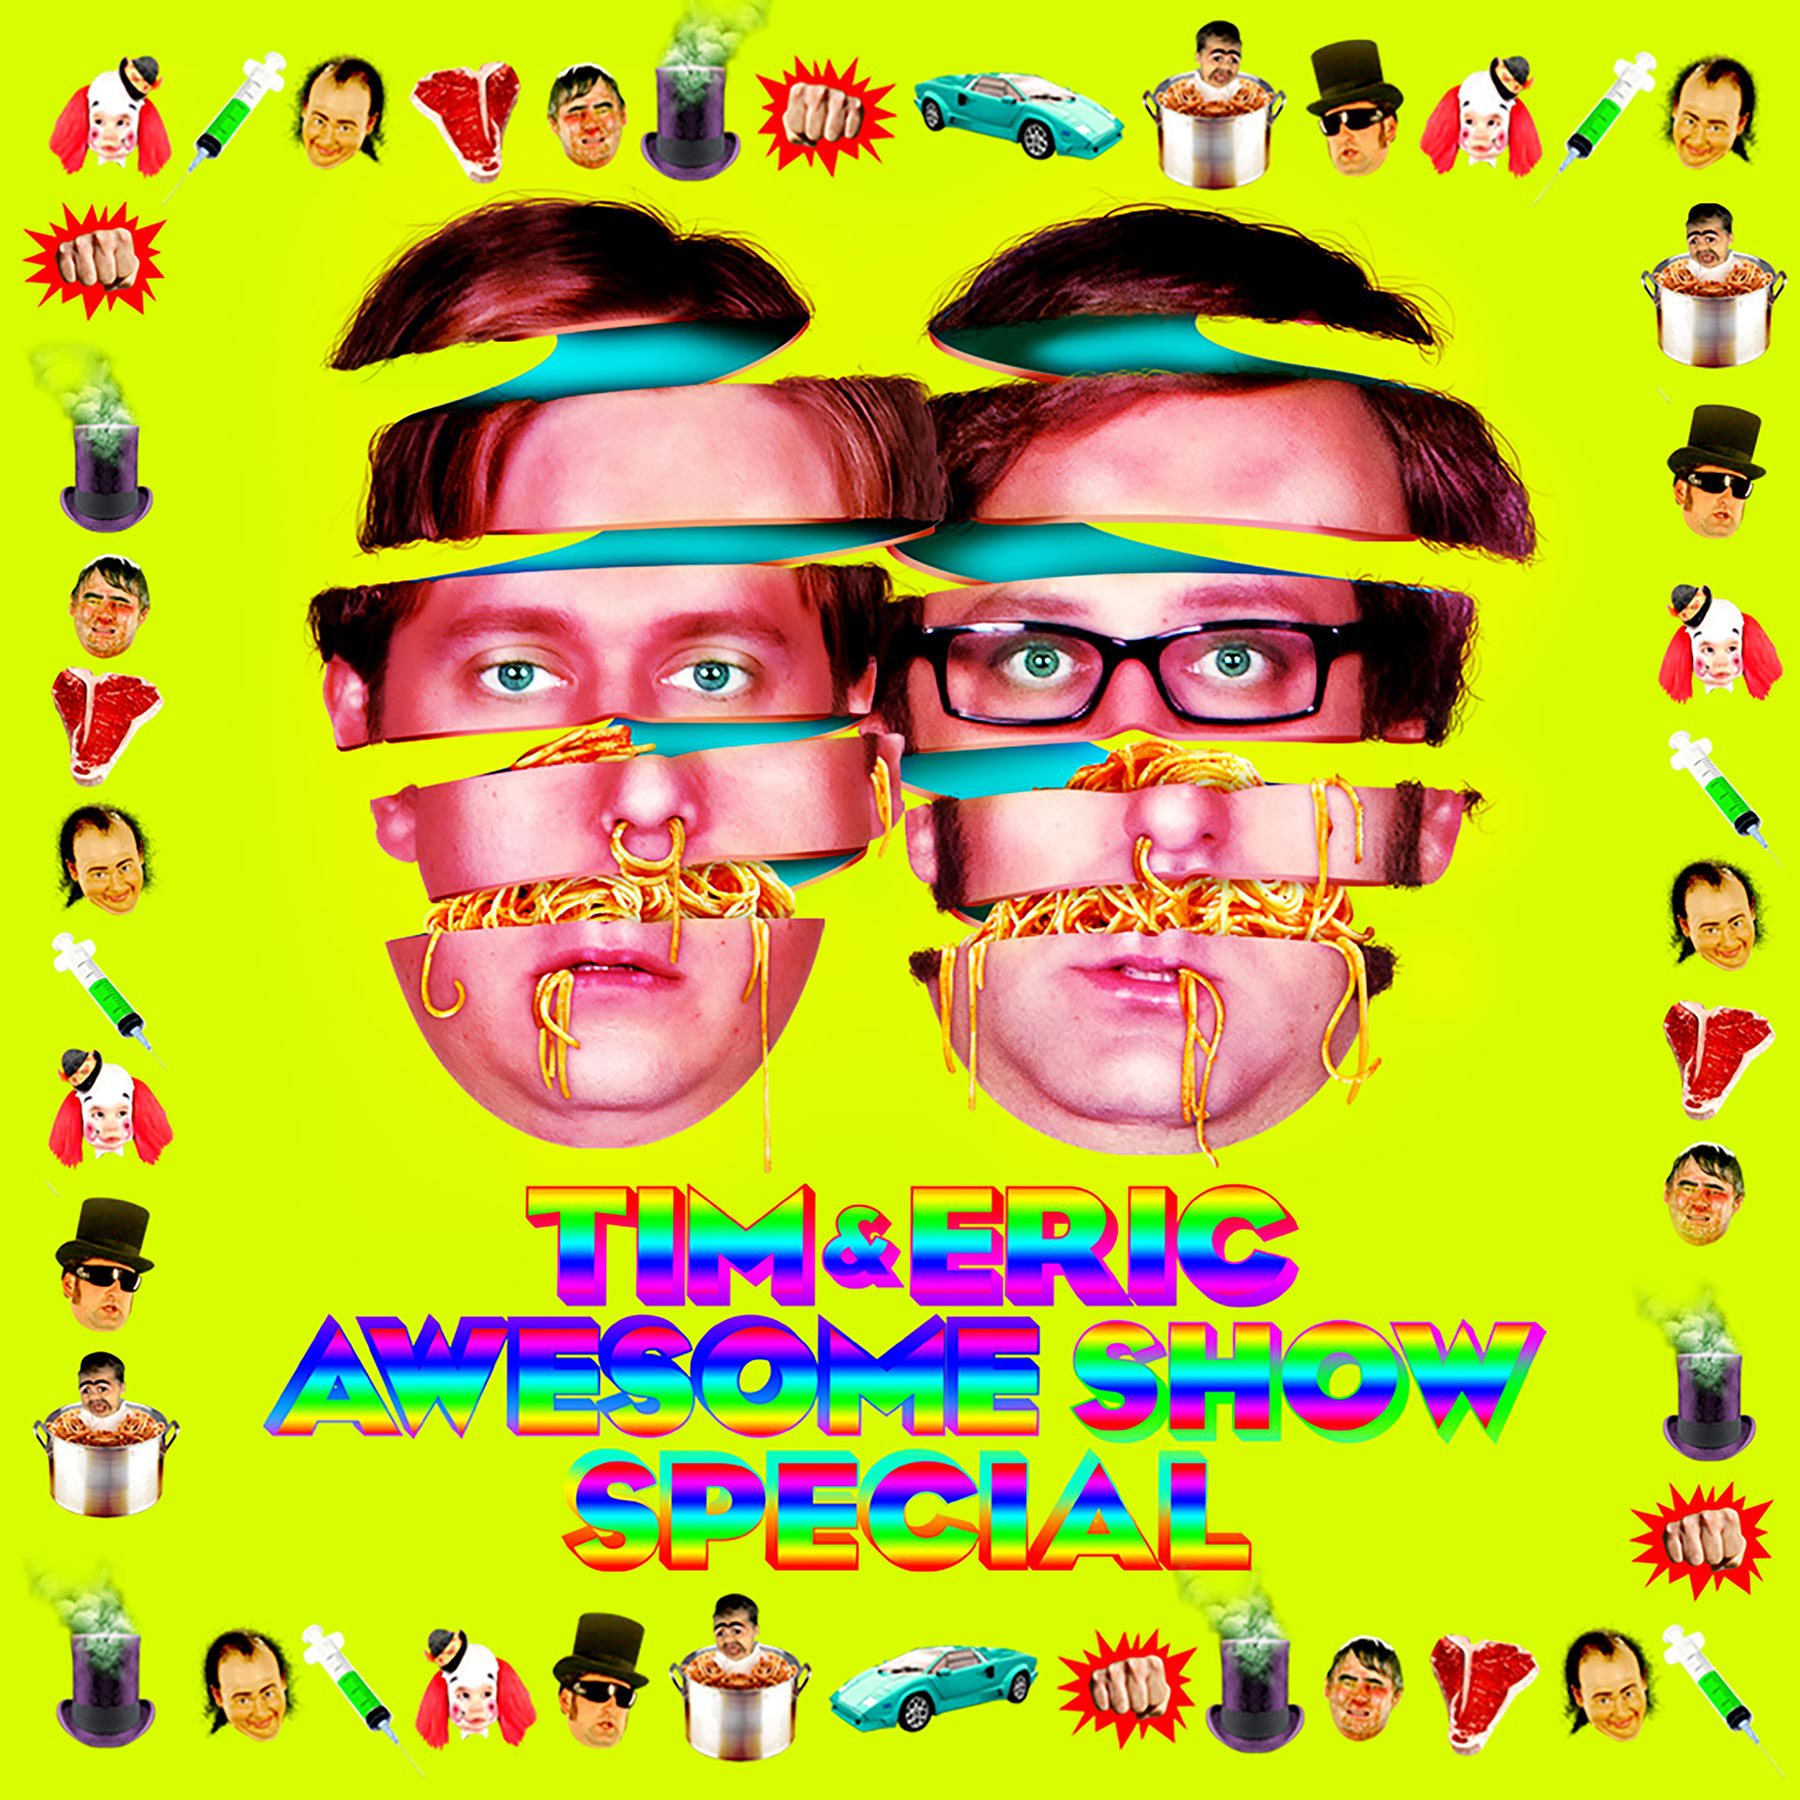 A <i>Tim and Eric Awesome Show, Great Job!</i> 10th Anniversary Special Is Coming to Adult Swim” title=”teasr_image2-1502393128″ data-original-id=”253114″ data-adjusted-id=”253114″ class=”sm_size_full_width sm_alignment_center ” data-image-source=”video_screenshot” />
<div class=